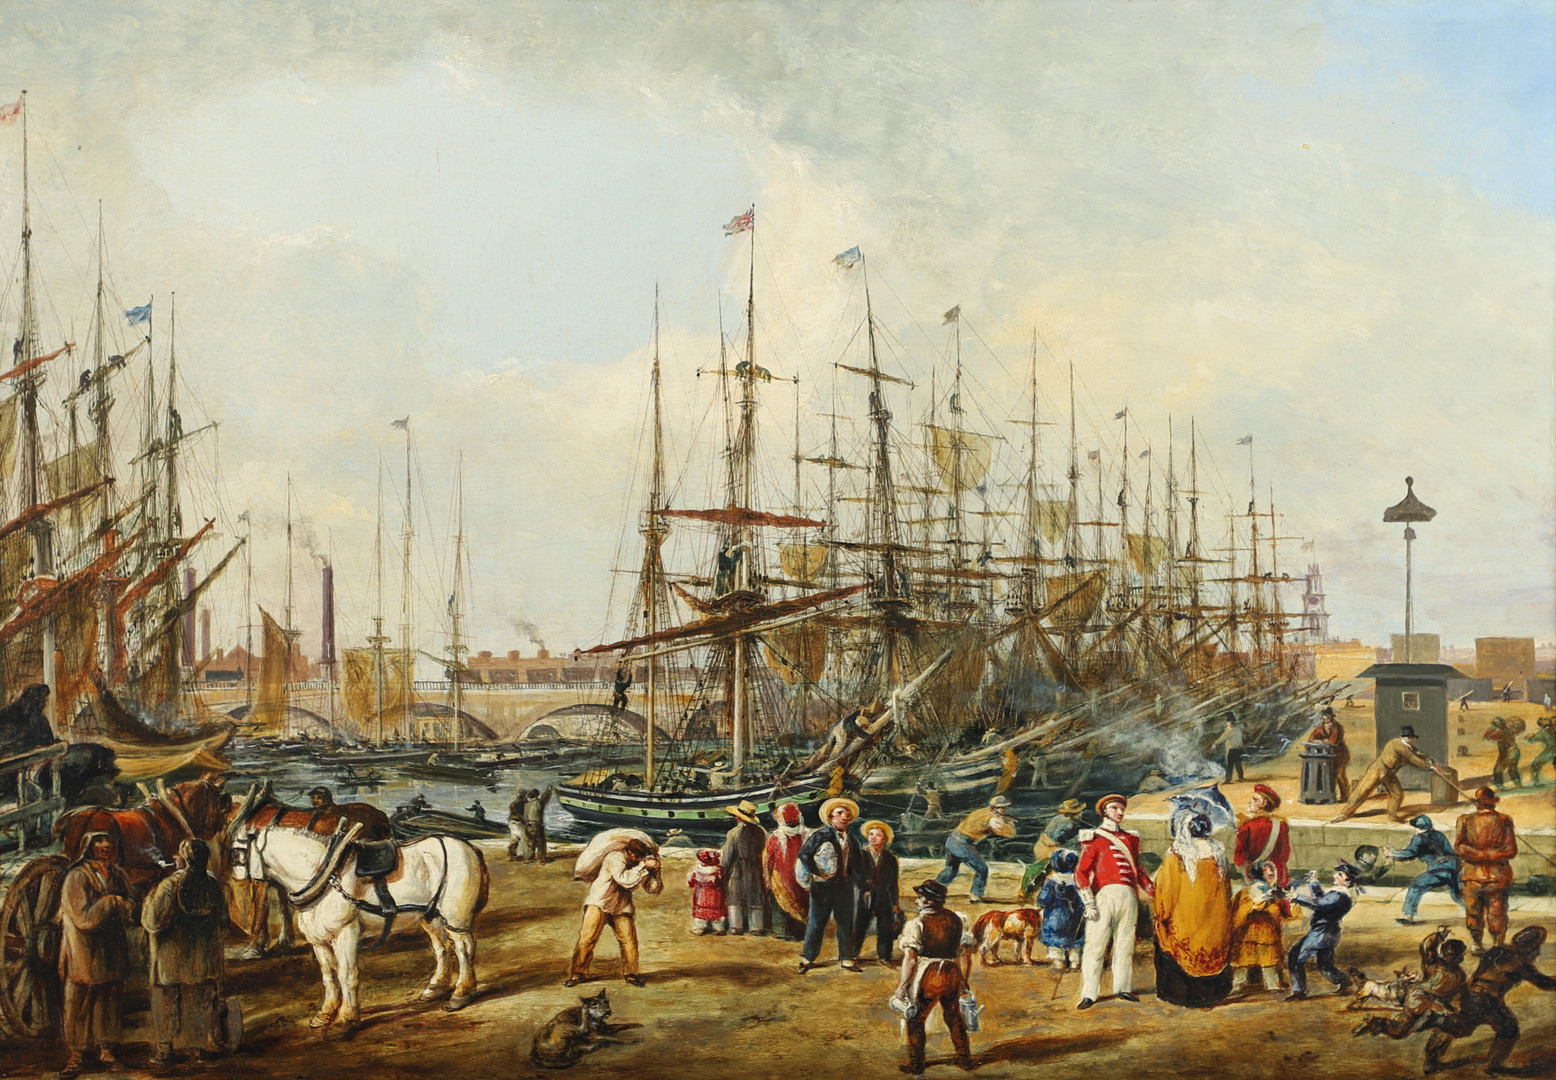 WILLIAM PARROTT (1813-1893). His circle. A BUSTLING DOCKYARD SCENE. - Image 2 of 3